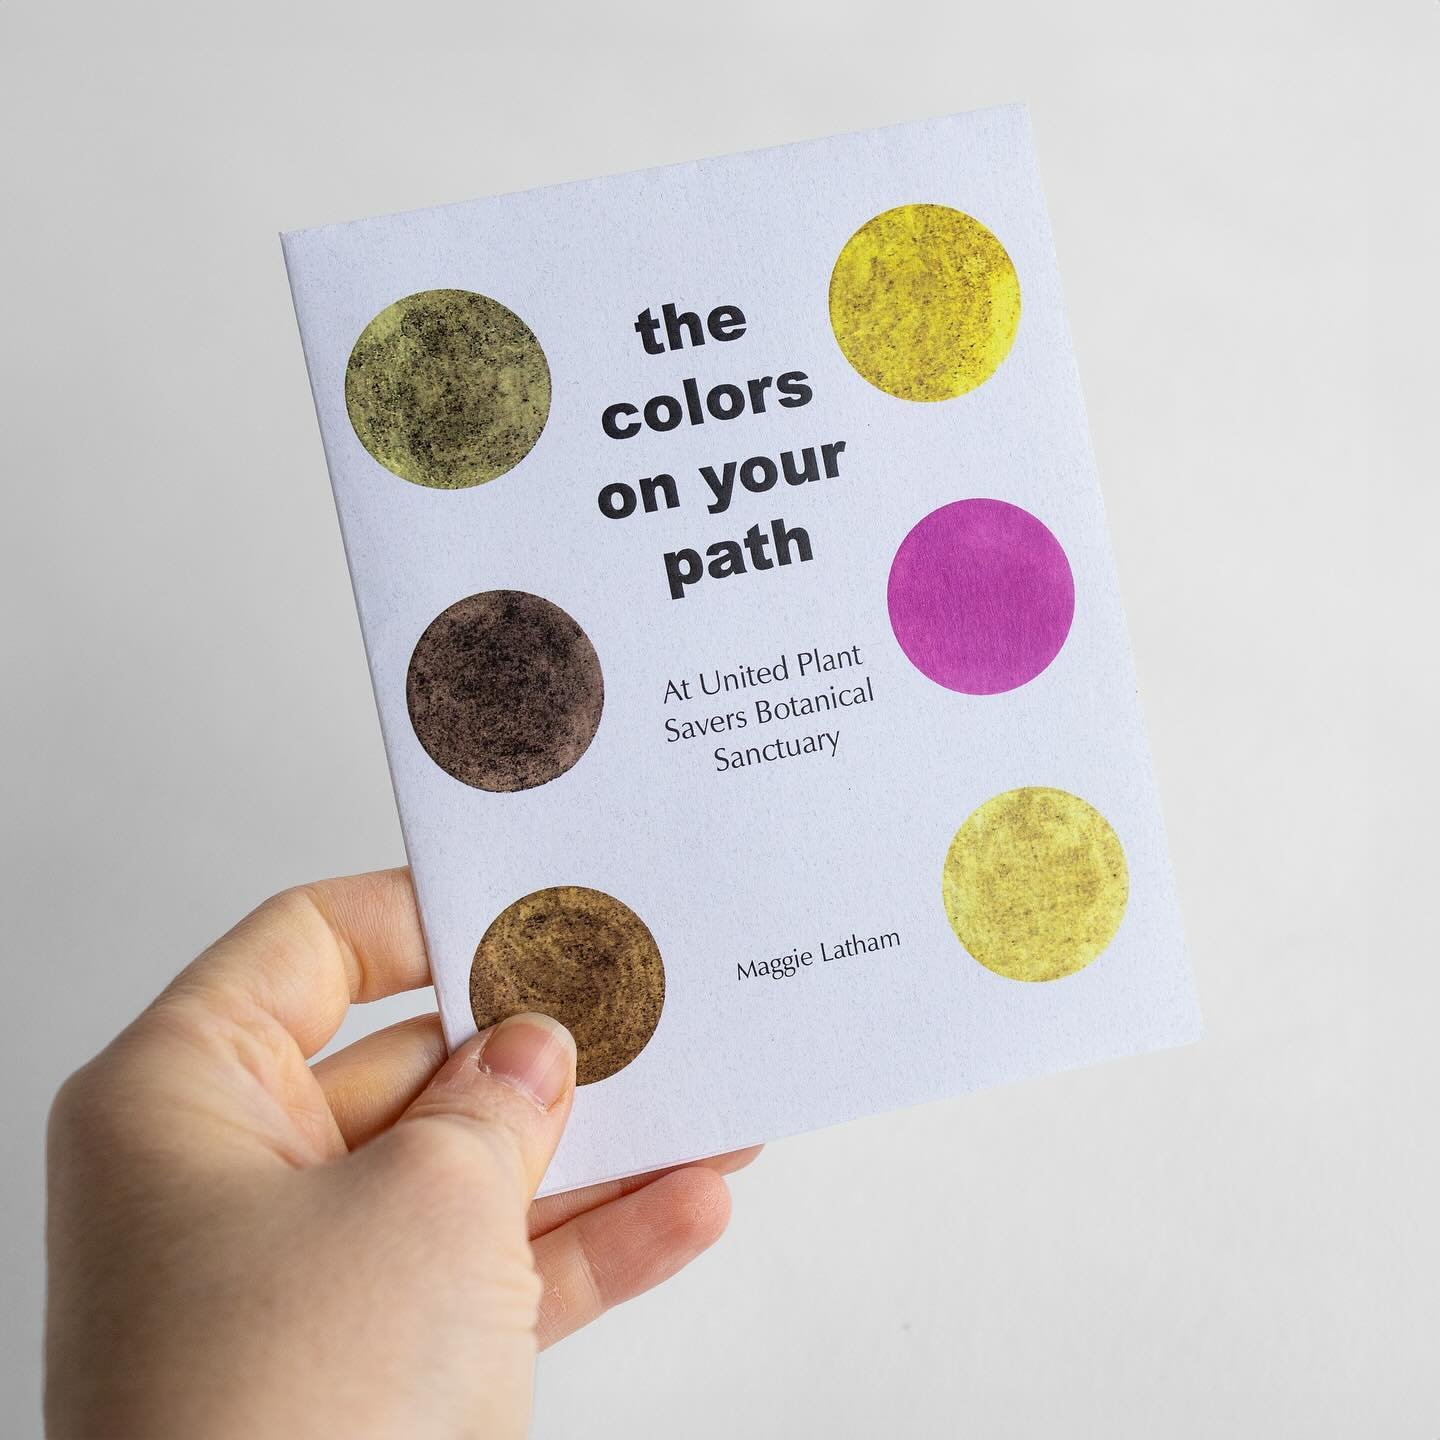 &ldquo;the colors on your path&rdquo; zine is available in my website shop now 🎨🌿 this zine is a companion guide of natural colors I encountered during my 2023 Deep Ecology Residency at the United Plant Savers botanical sanctuary. The pages contain